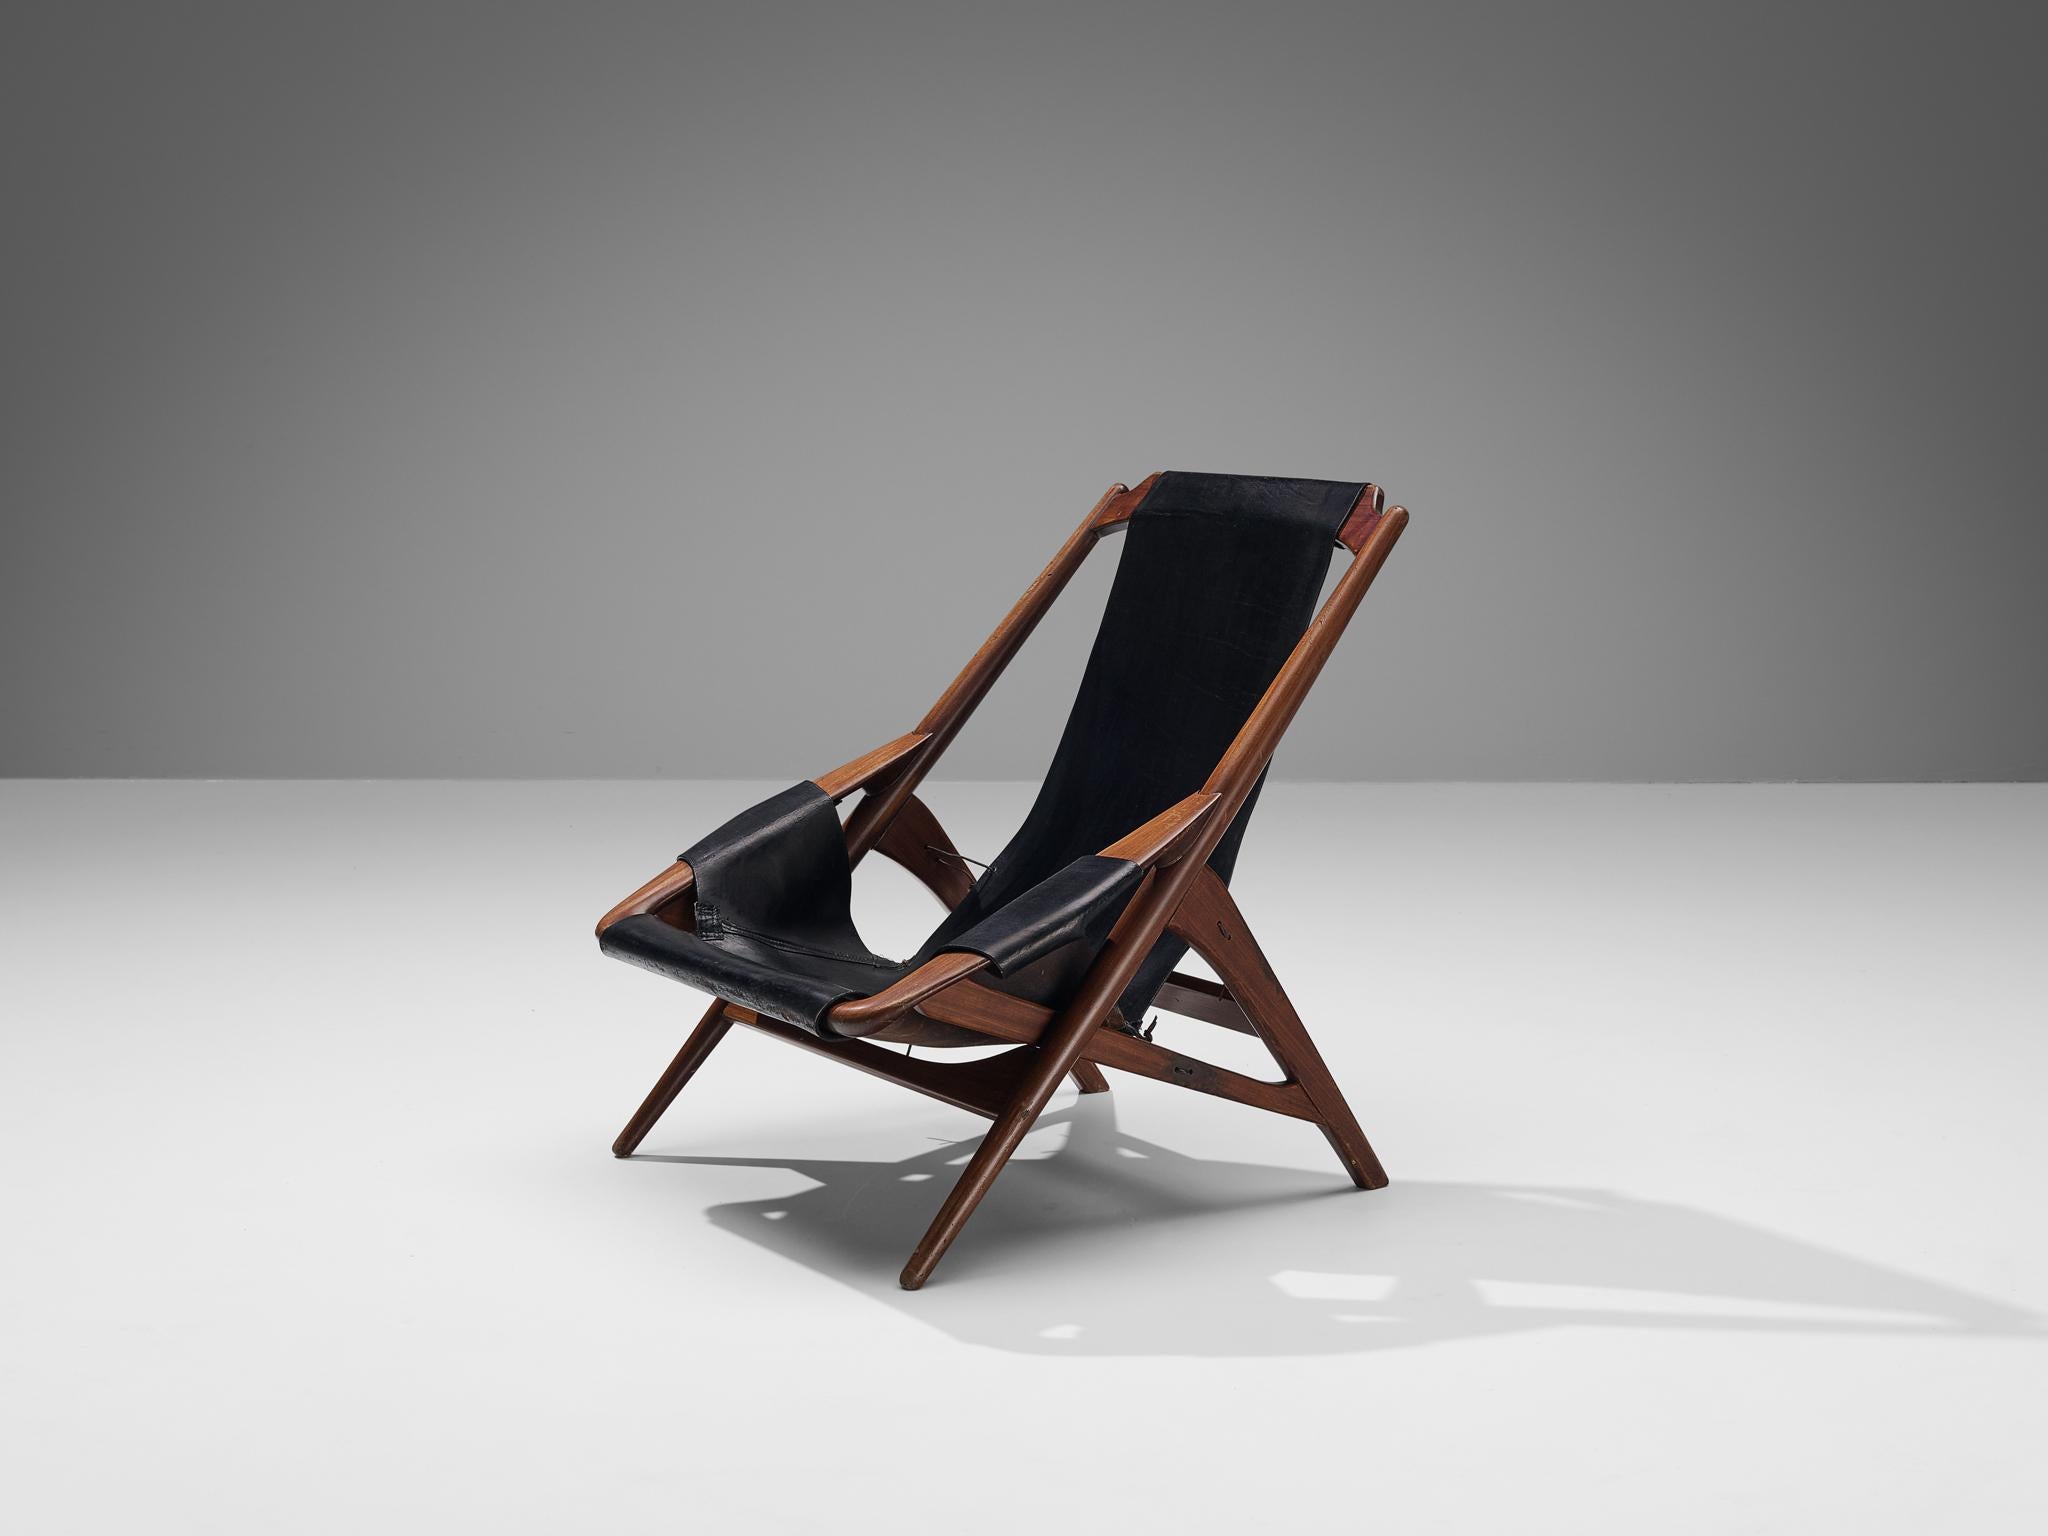 W.D. Andersag, lounge chair, teak, leather, steel, Italy, 1960s

Beautiful armchair designed by W.D. Ansersag. This design has a very dynamic appearance by means of the sharp lines discernible in the wooden frame. The solid construction reminds of